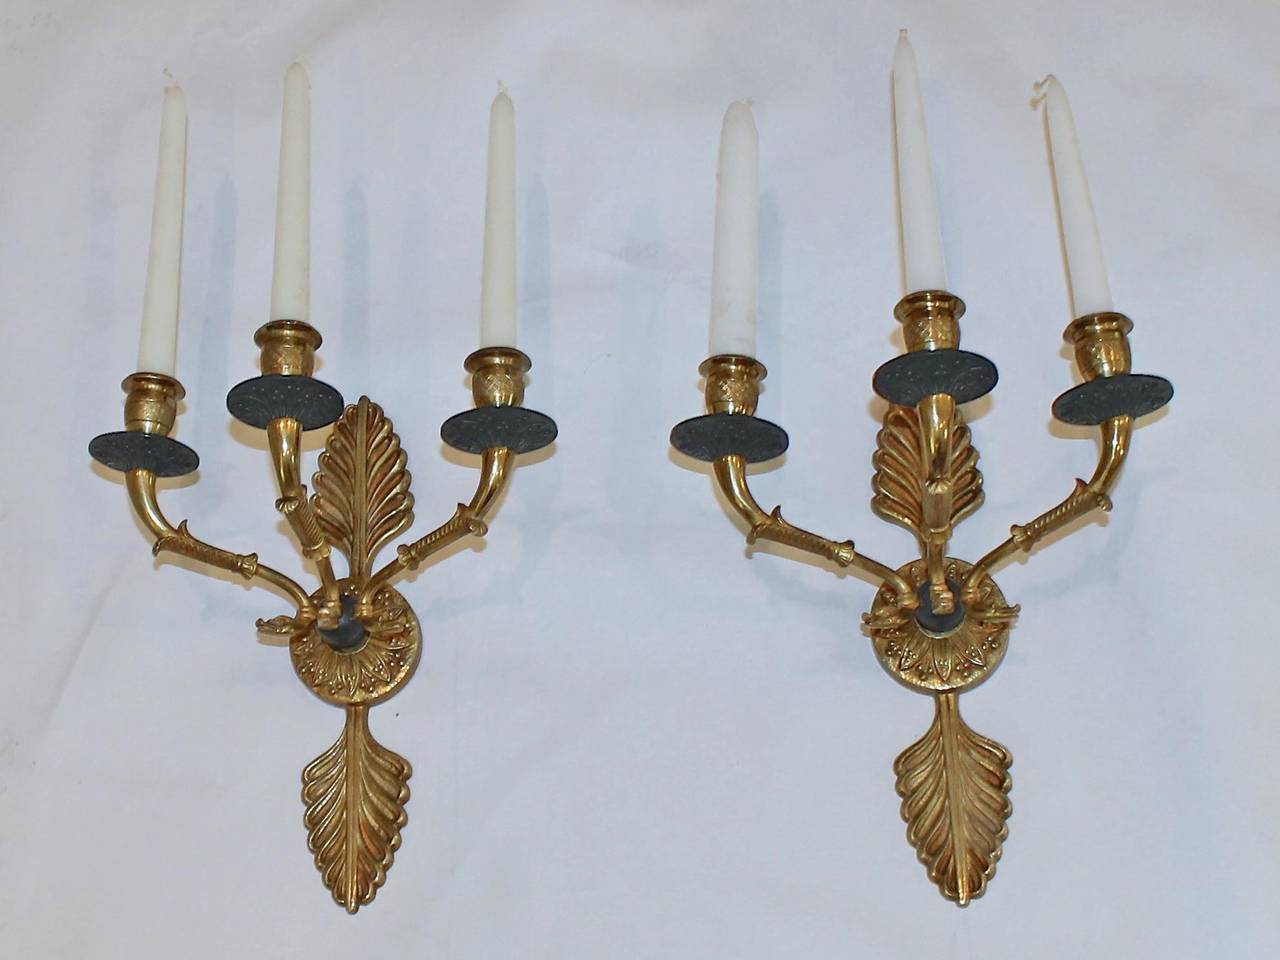 Pair of French Empire Style Doré Wall Sconces For Sale 2